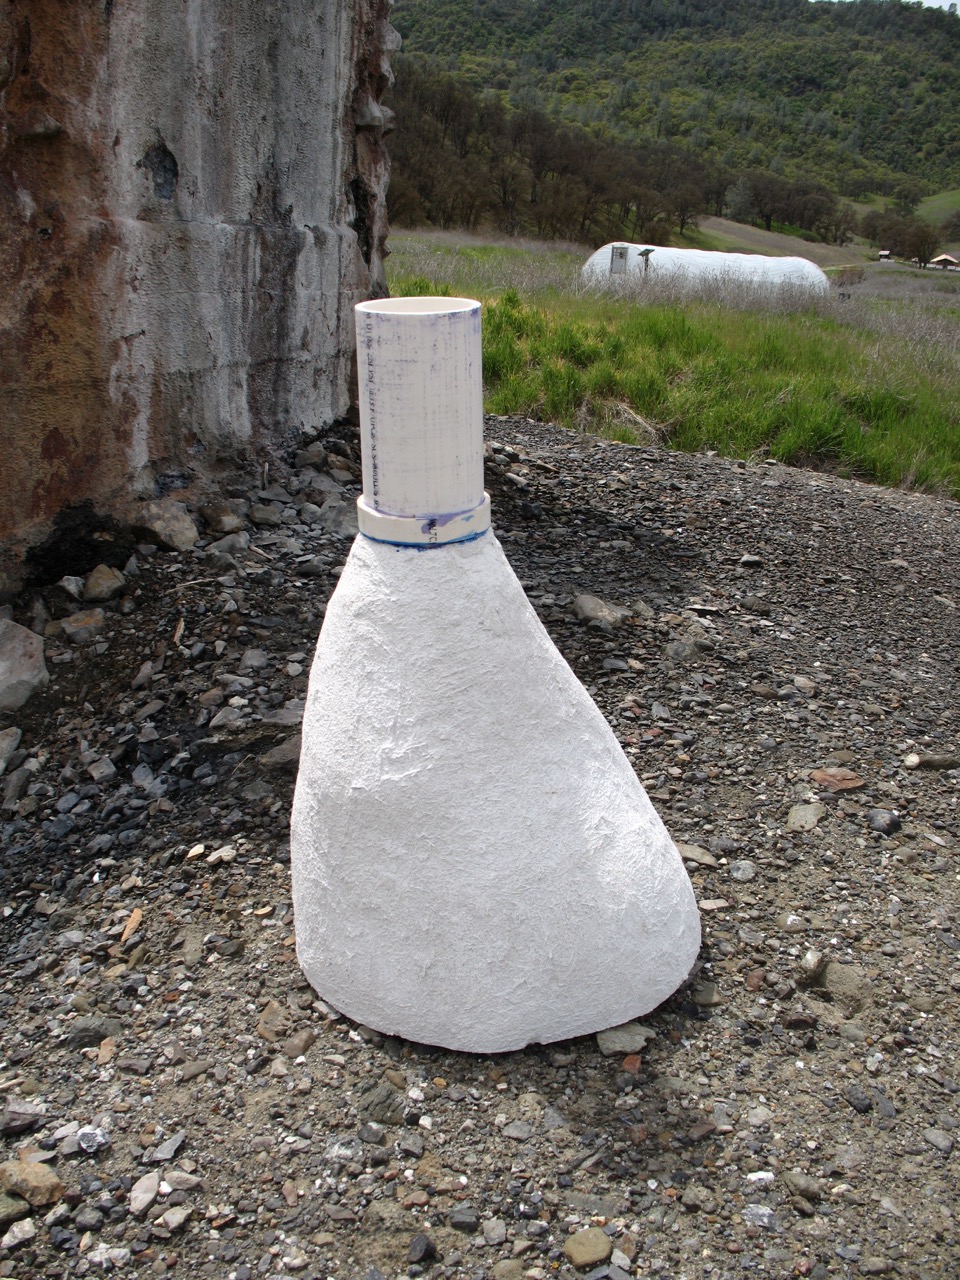 Finished cement form for capping the spring